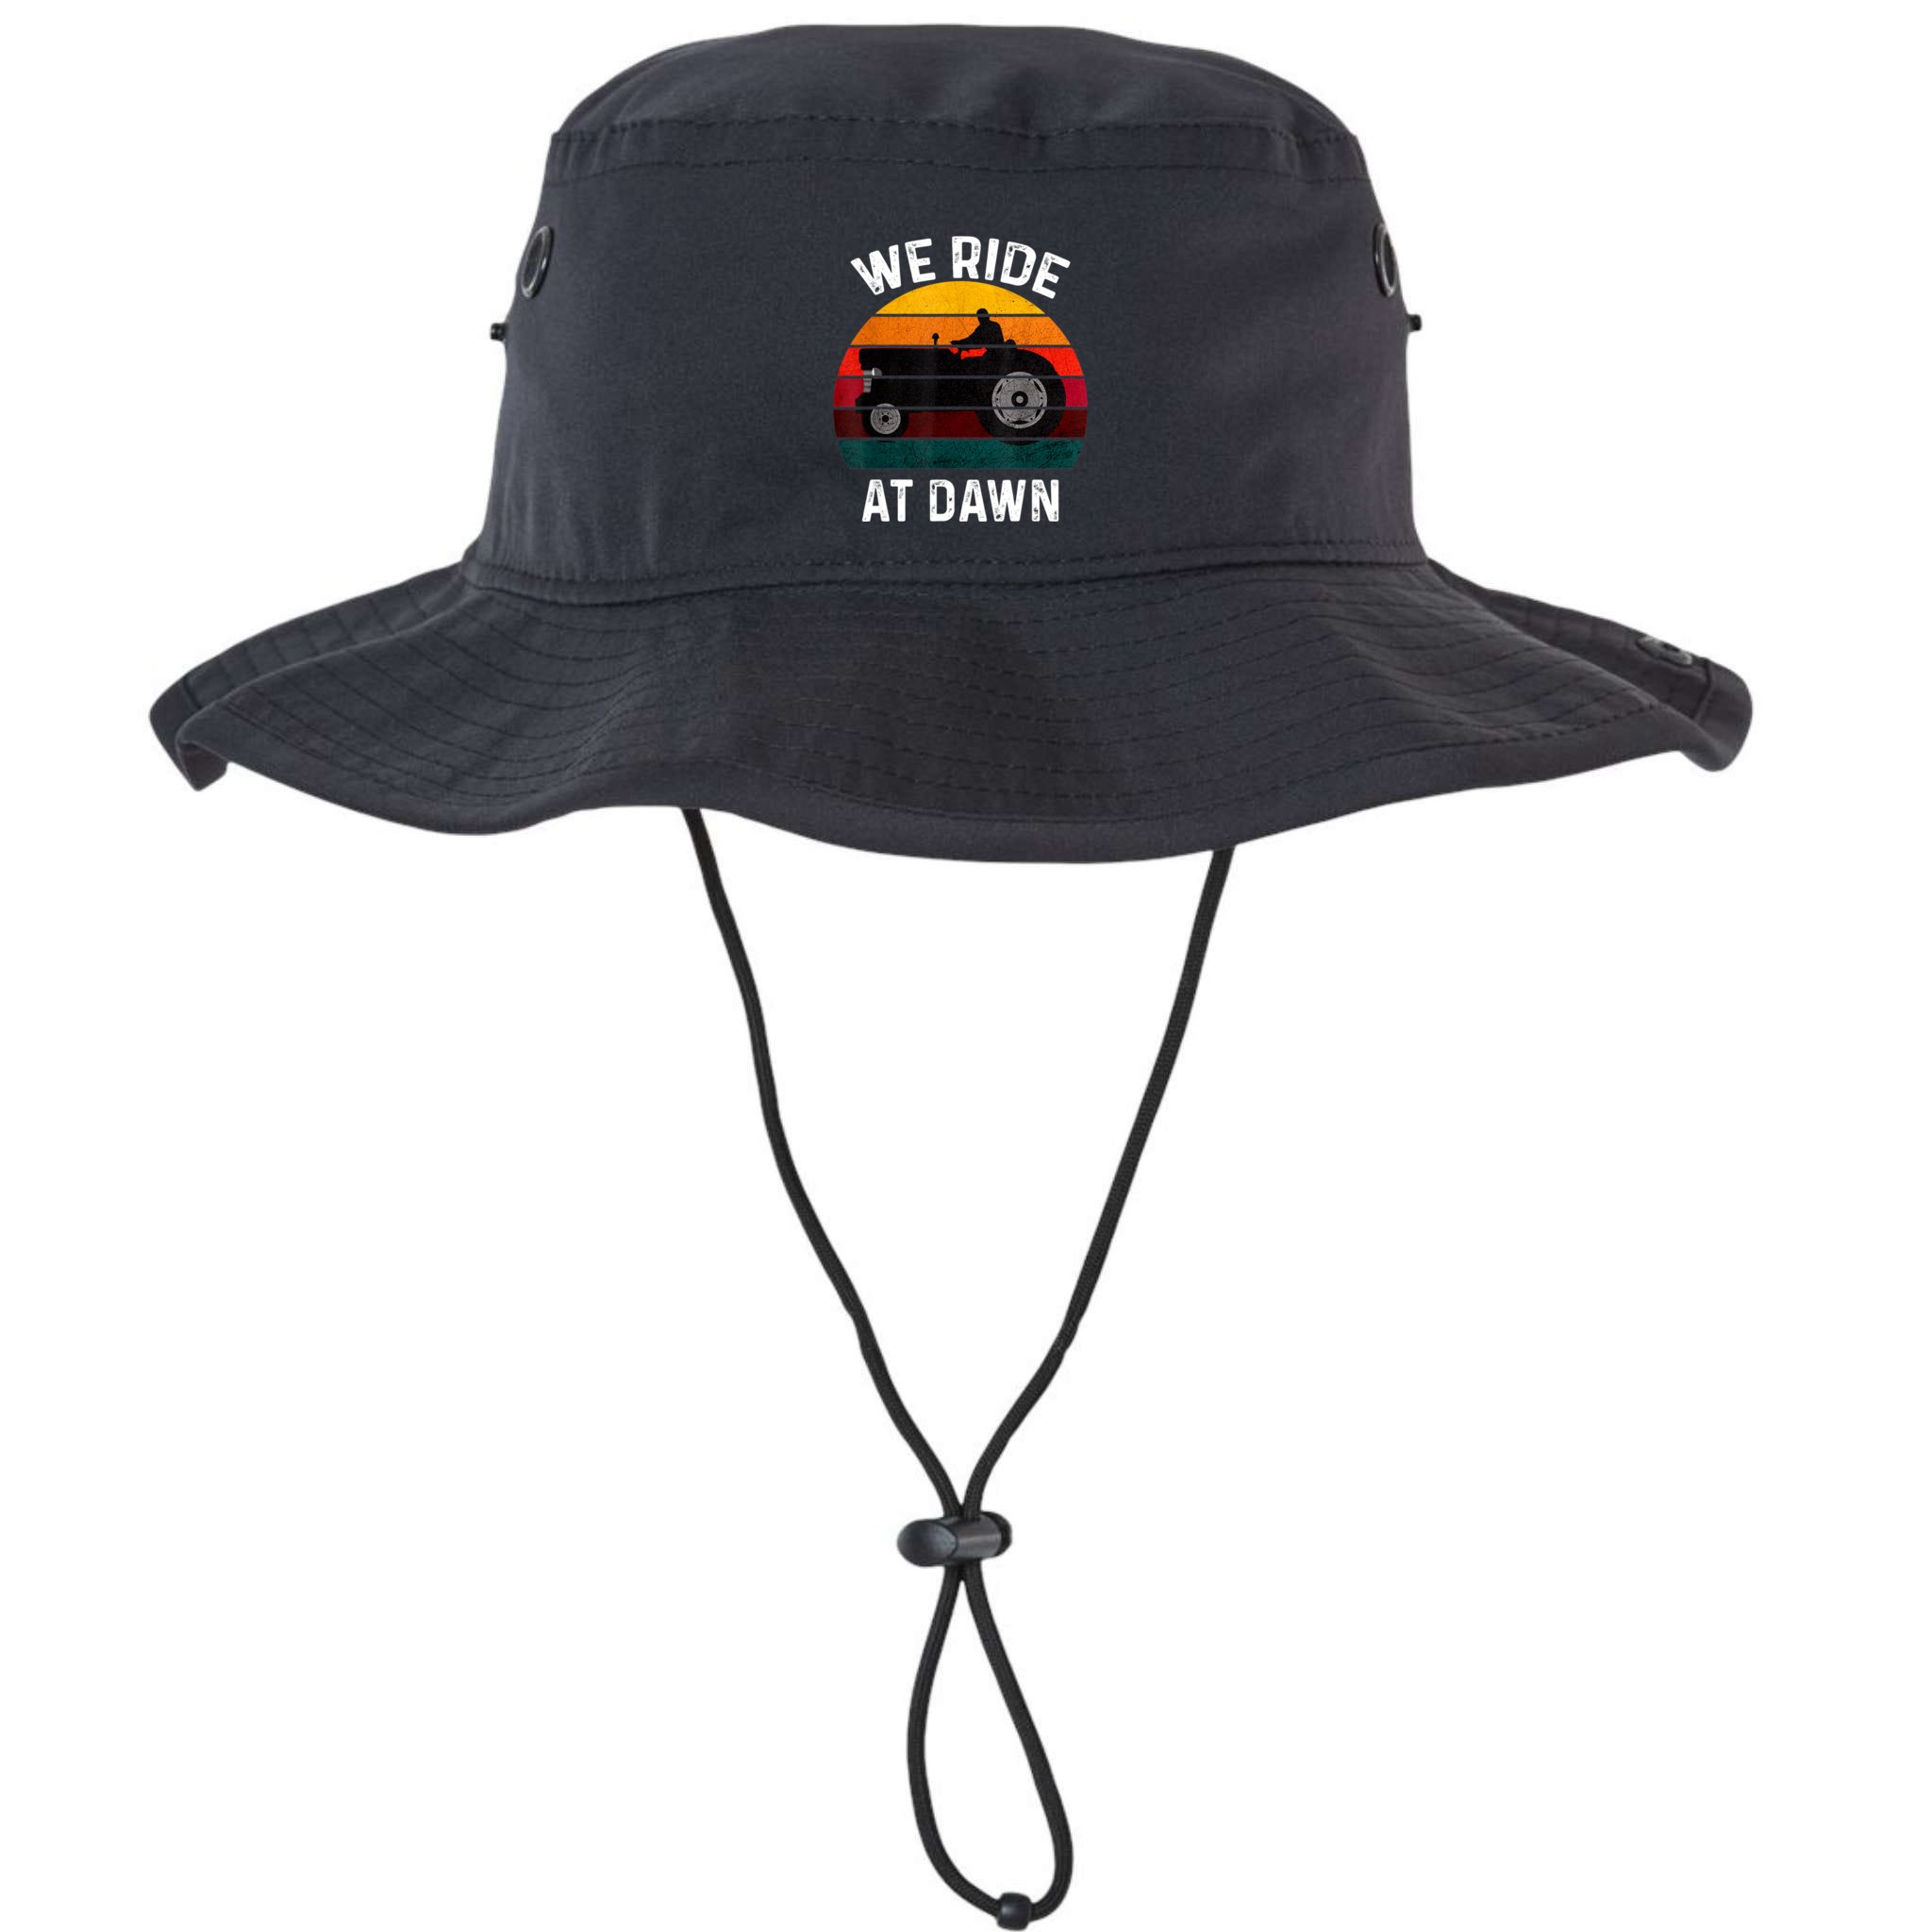 We Ride at Dawn Lawn Mower Lawn Mowing Dad Yard Work for Men Legacy Cool Fit Booney Bucket Hat